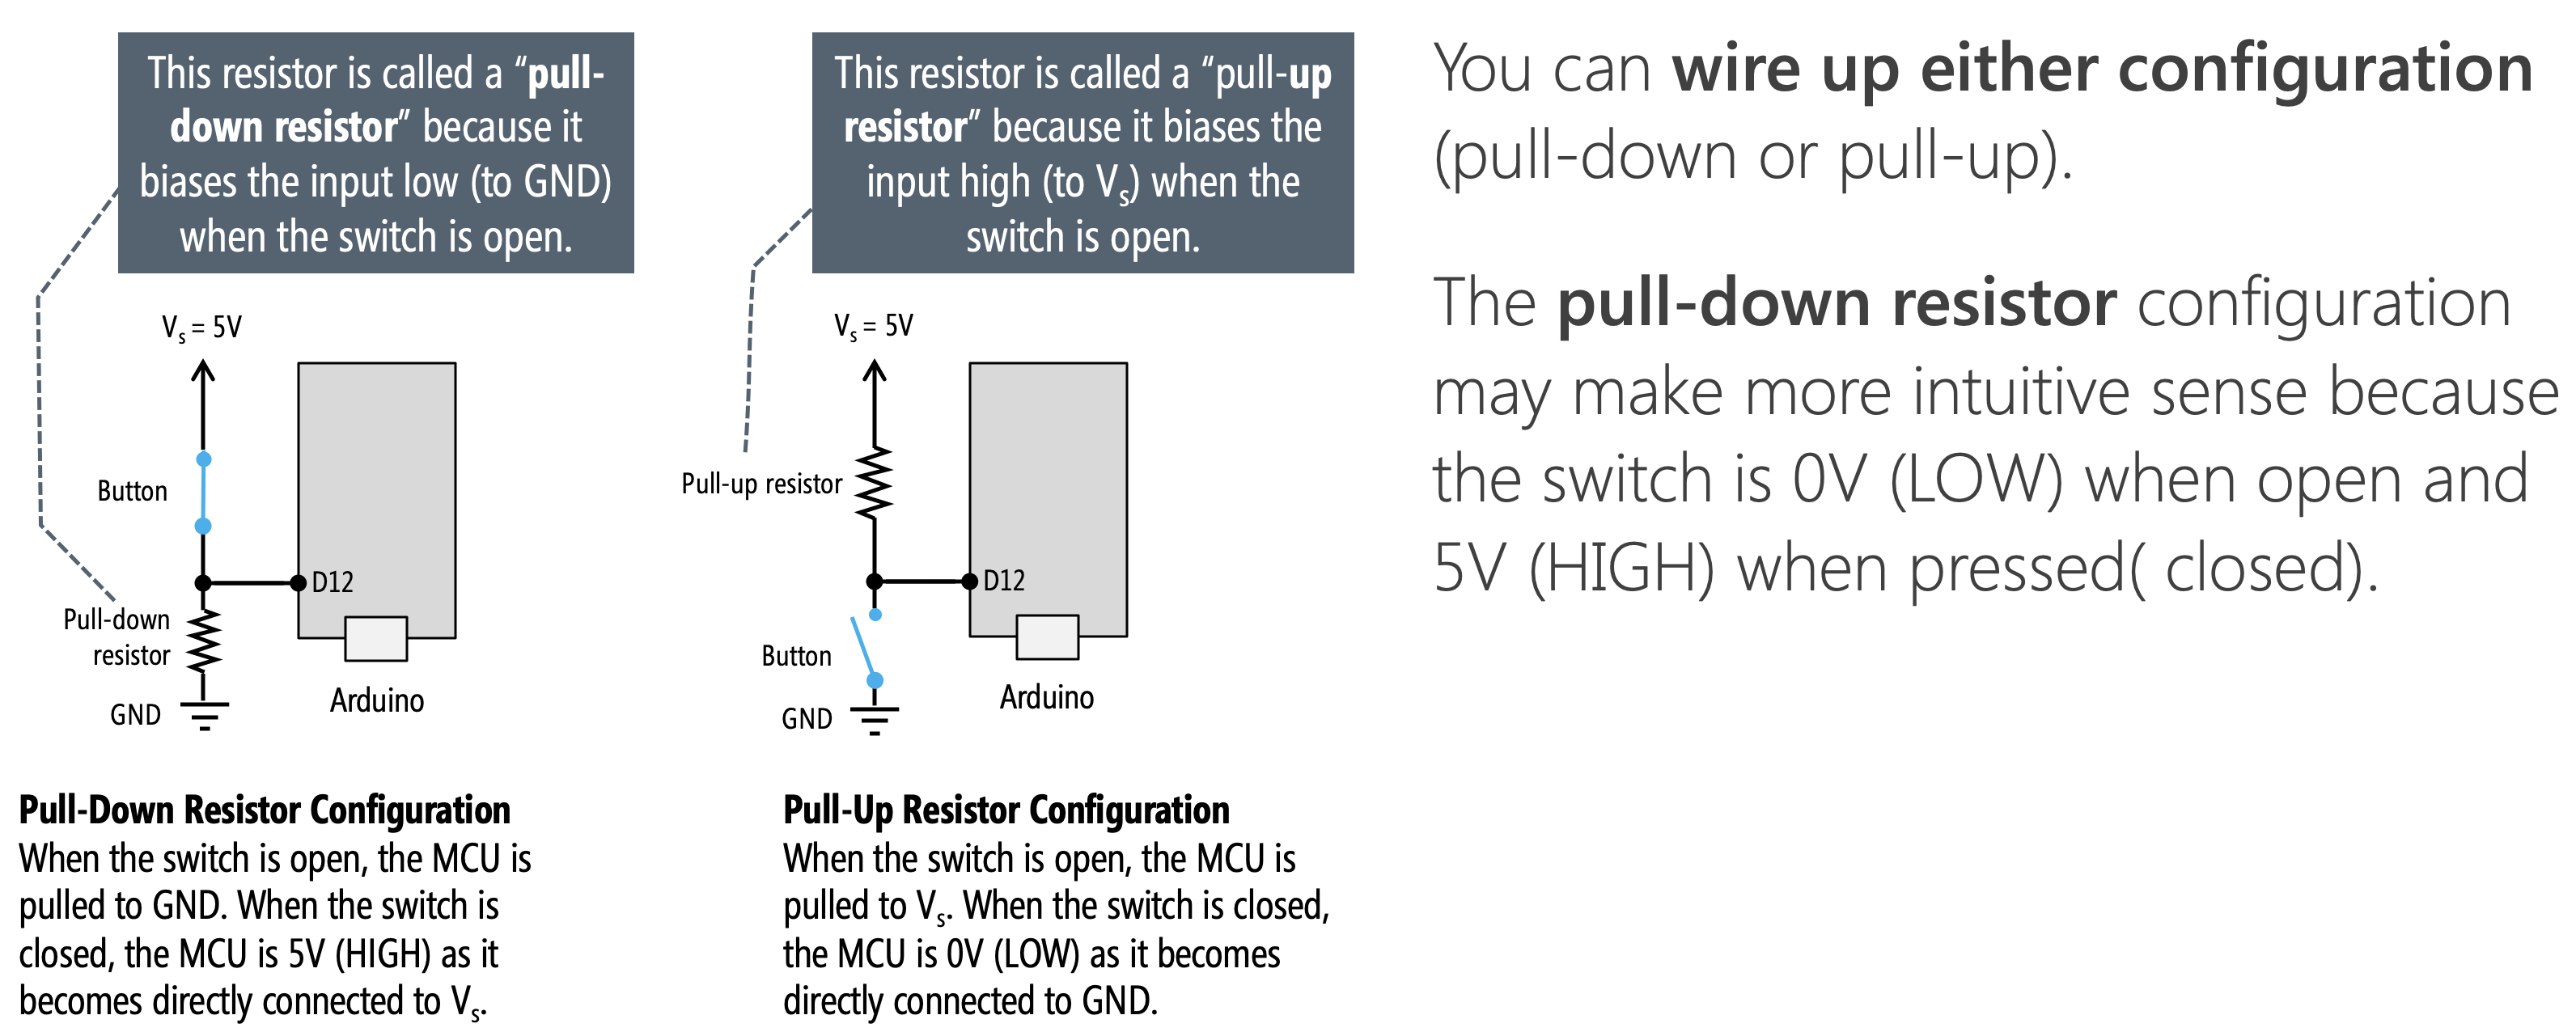 Difference between a pull-down vs. pull-up resistor